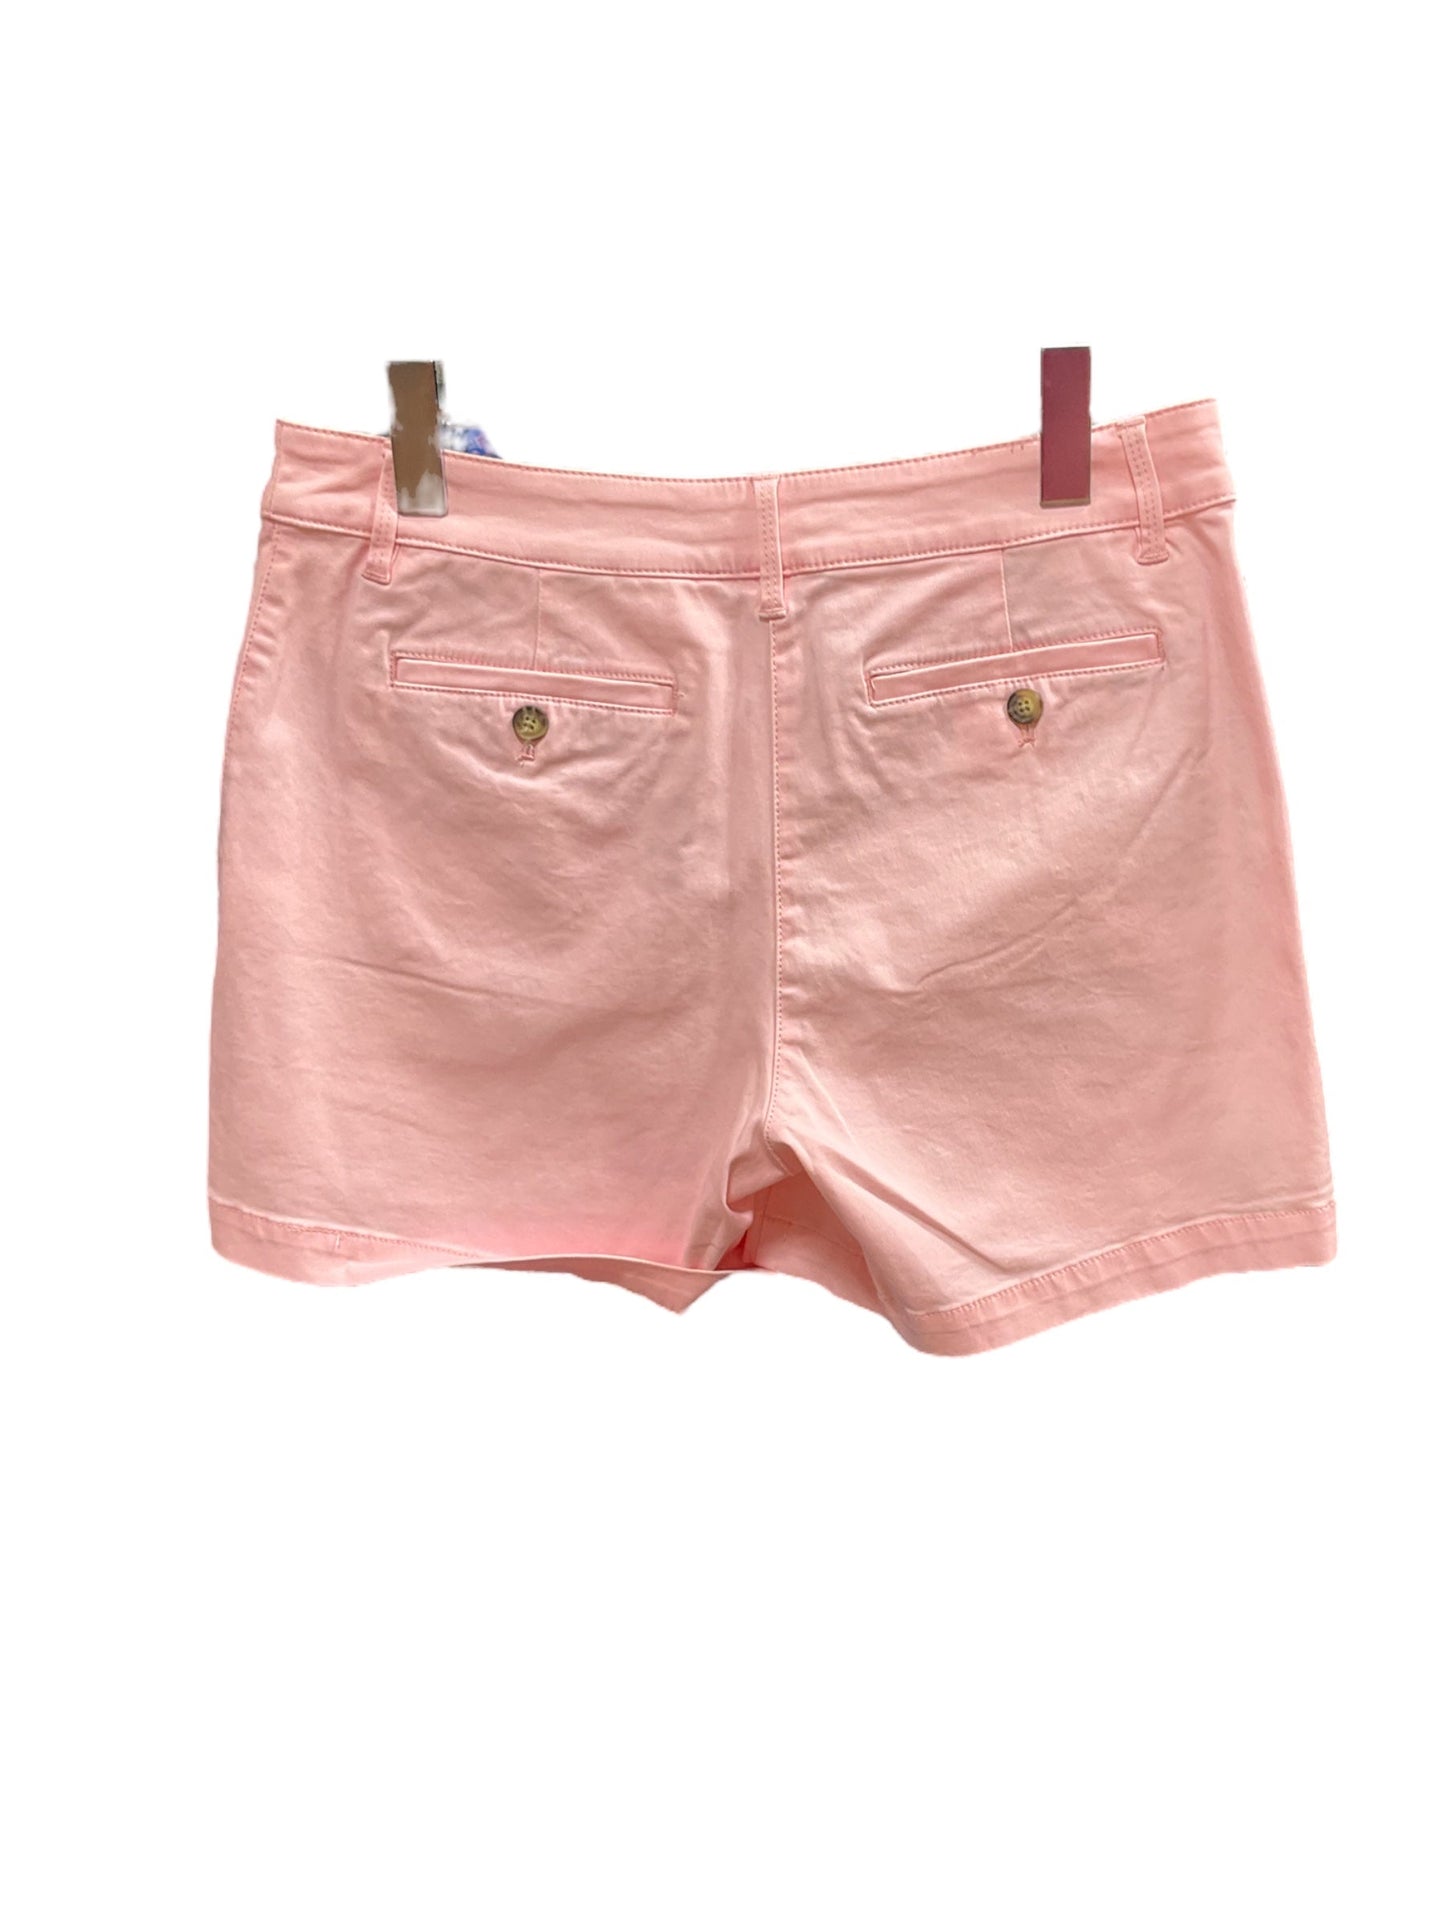 Shorts By Tommy Bahama  Size: 6